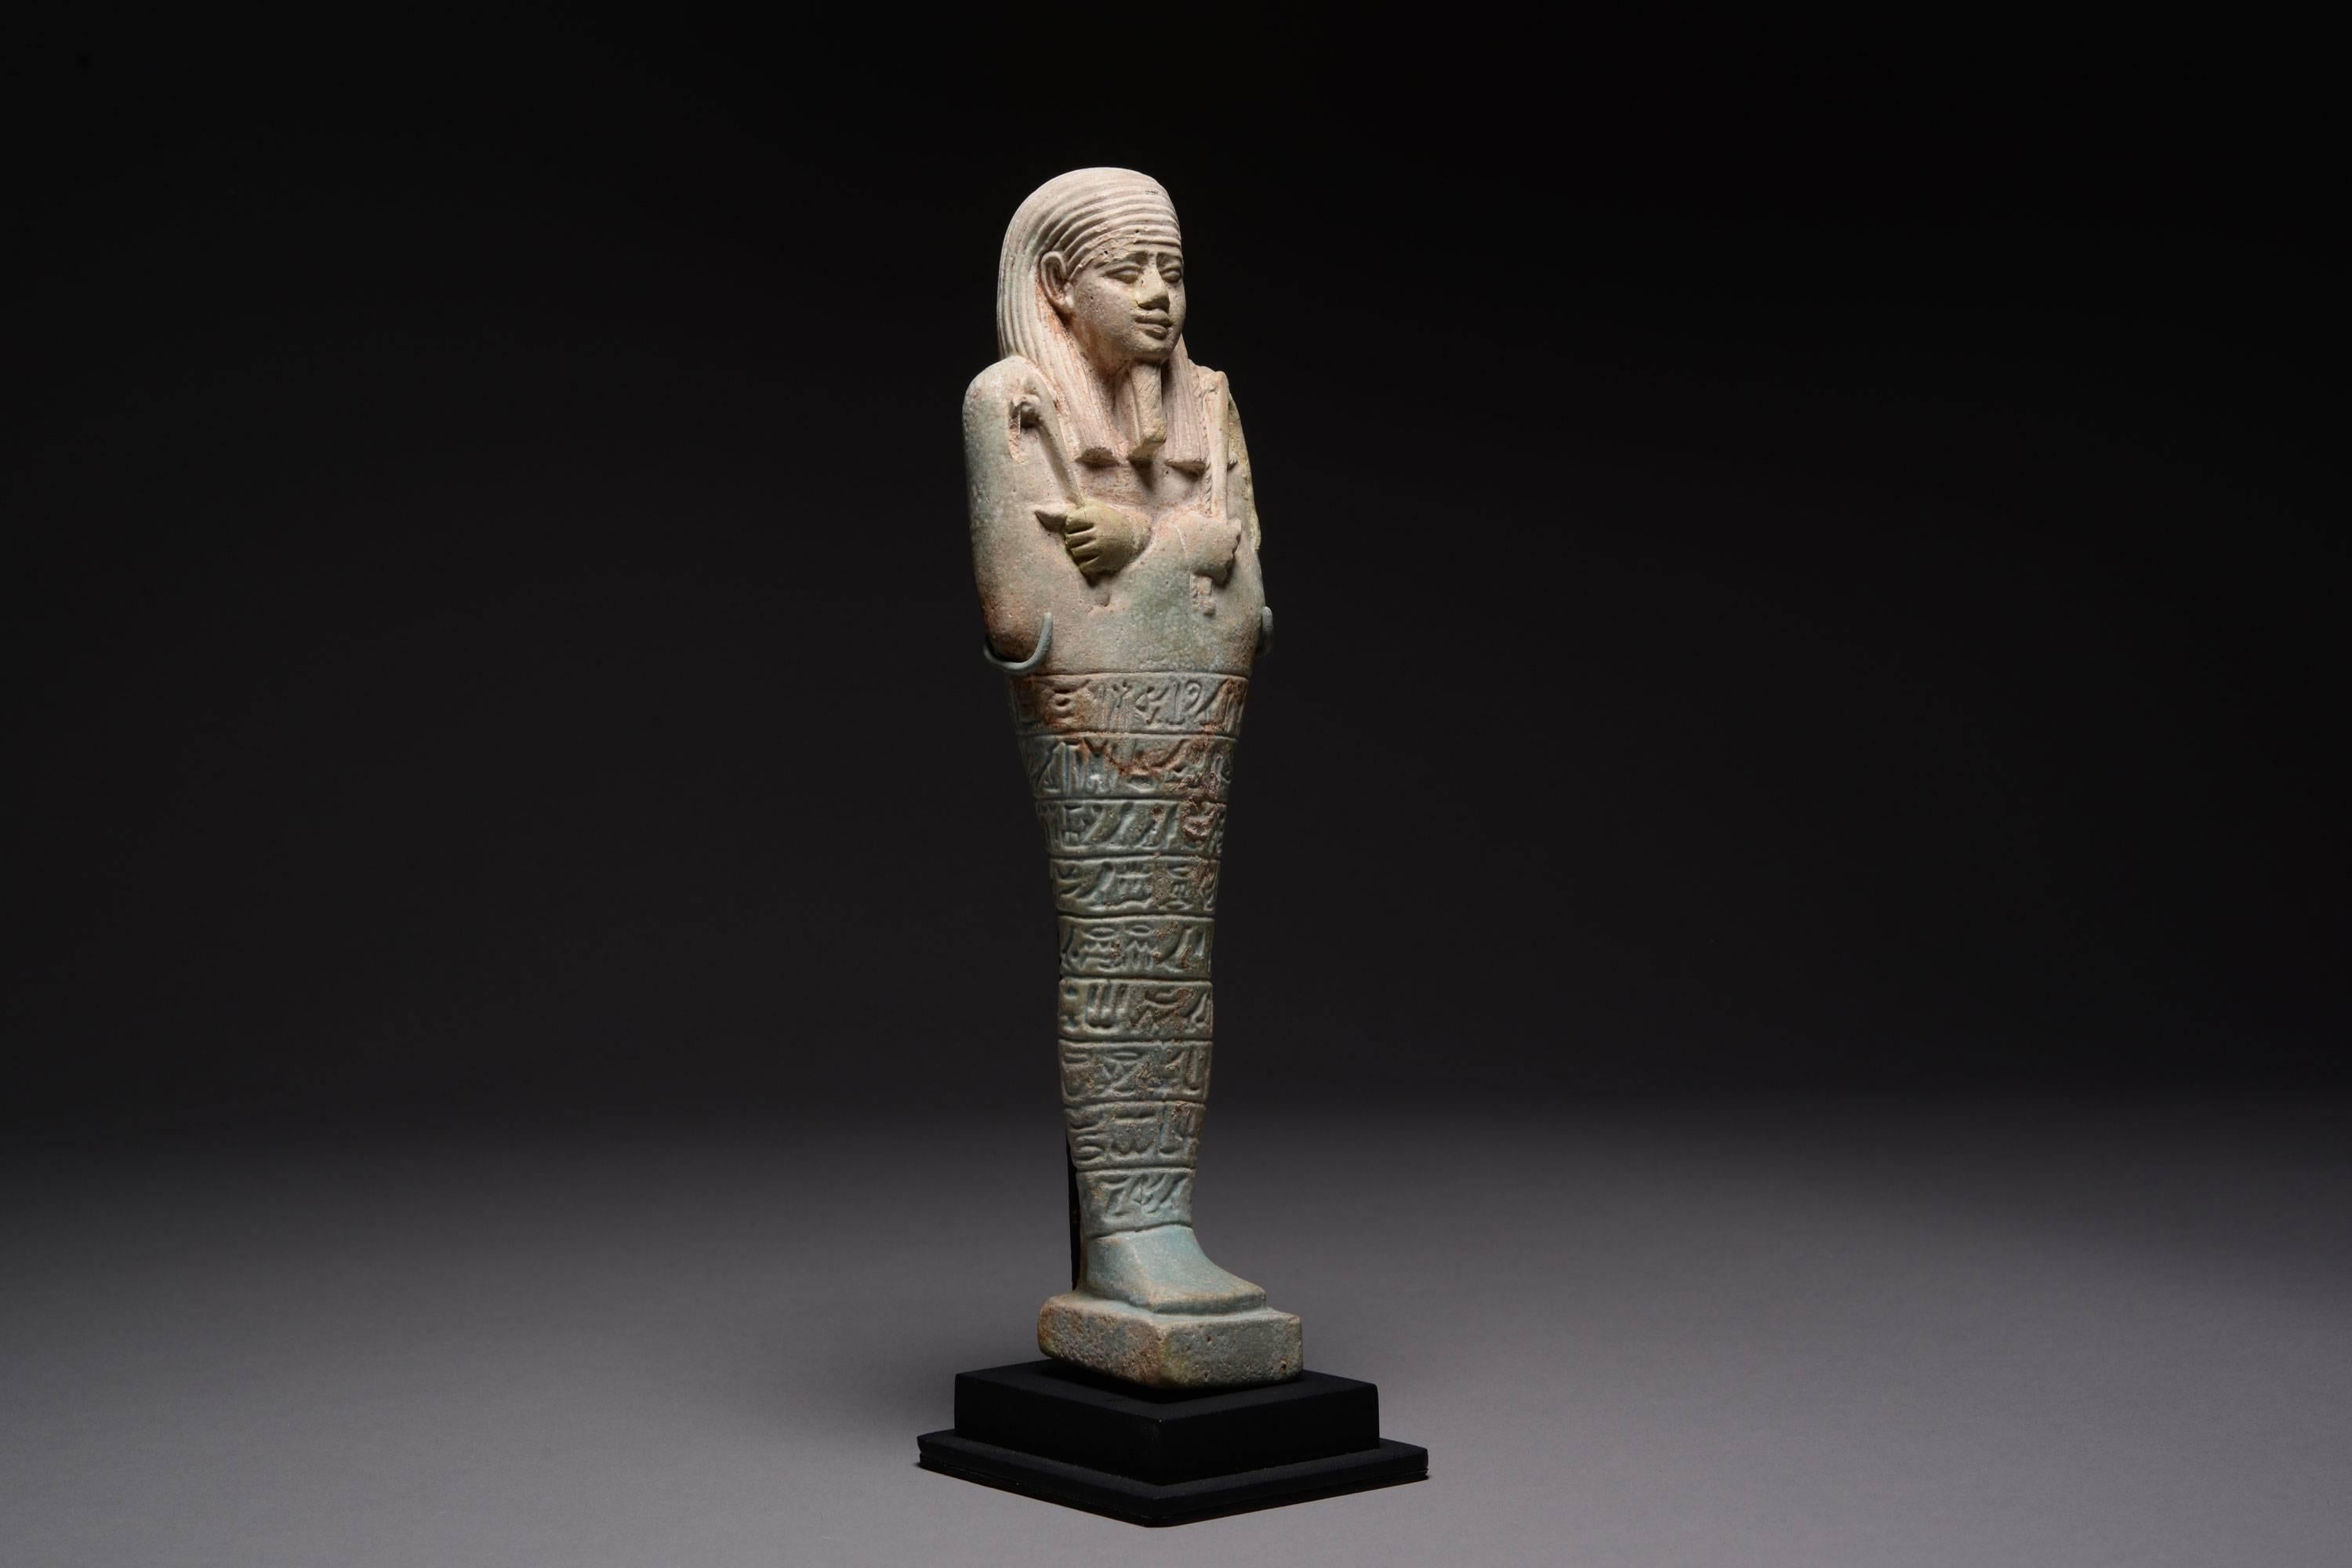 A very large ancient Egyptian faience shabti for Horudja, prophet of Neith, born of Shedet.  Dating to the Late Period, XXX Dynasty, circa 380-343 BC.

Amongst the largest shabties known from ancient Egypt, those of Horudja are also finely